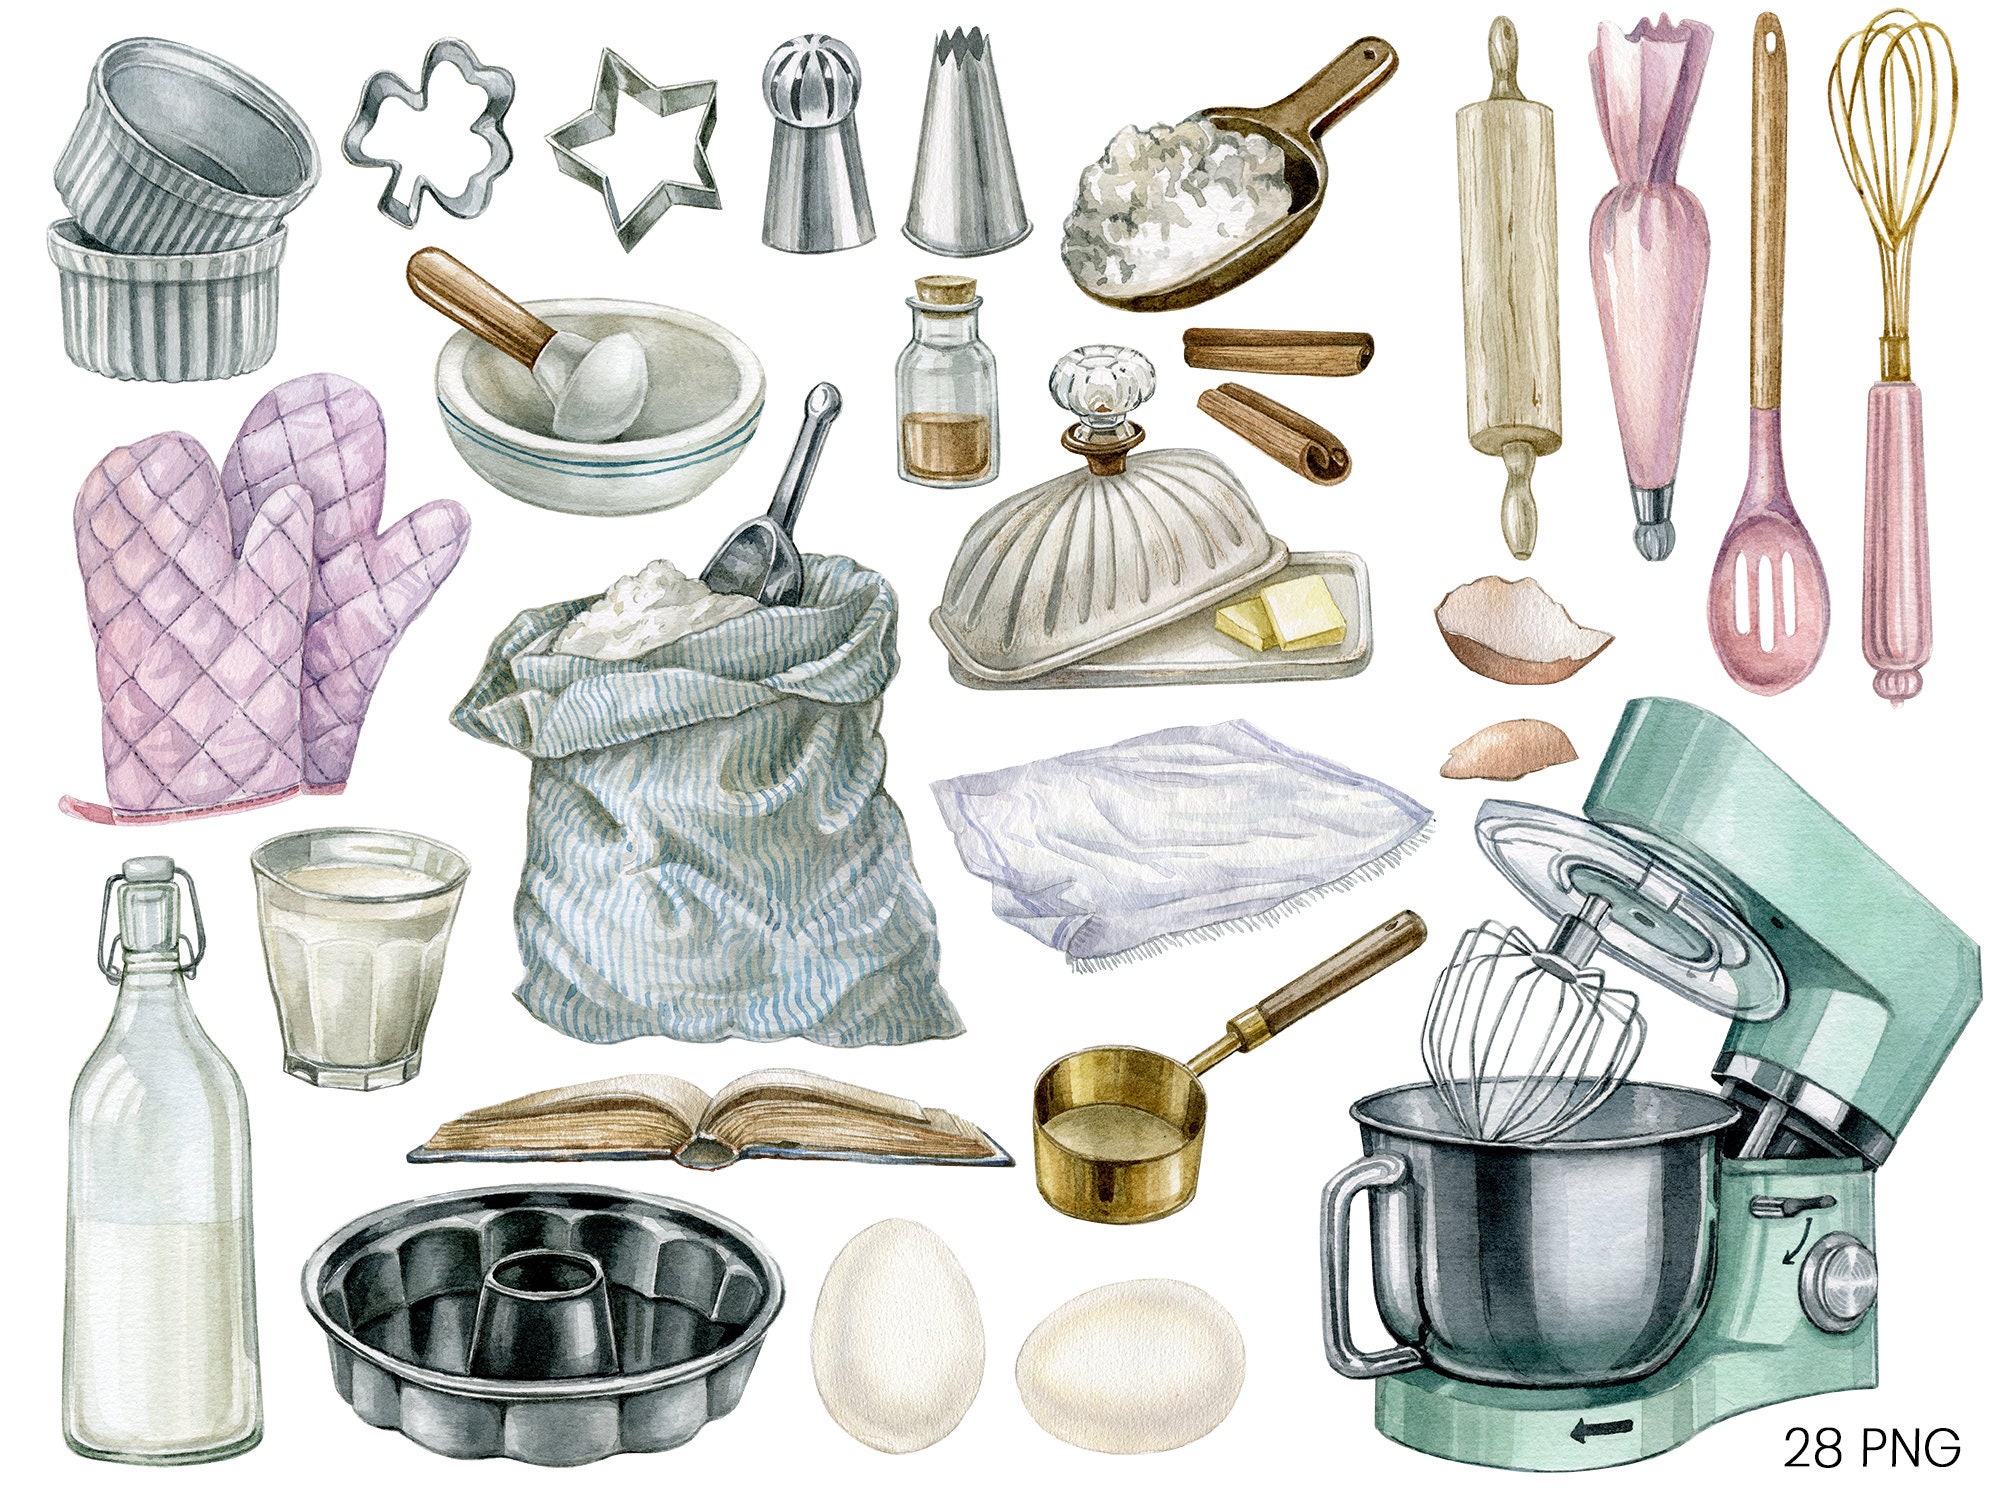 Bakery Watercolor Clipart, Kitchen Baking Tools and Supplies